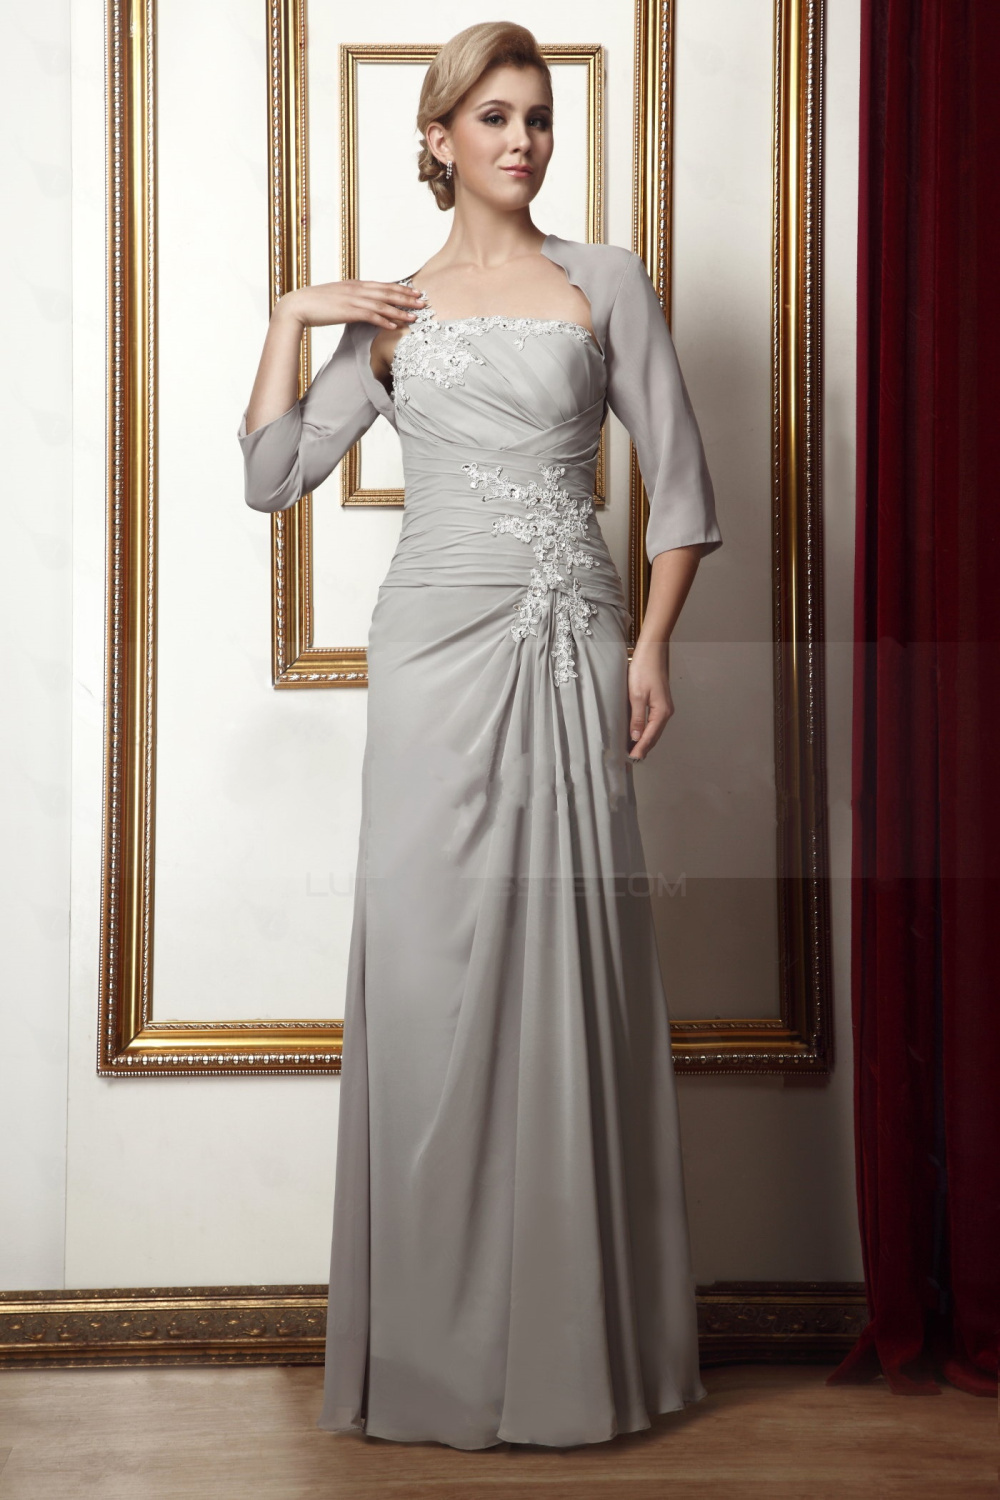 Elegant One Shoulder Beaded Applique Long Chiffon Mother Of The Bride Dresses With A Jacket M010016